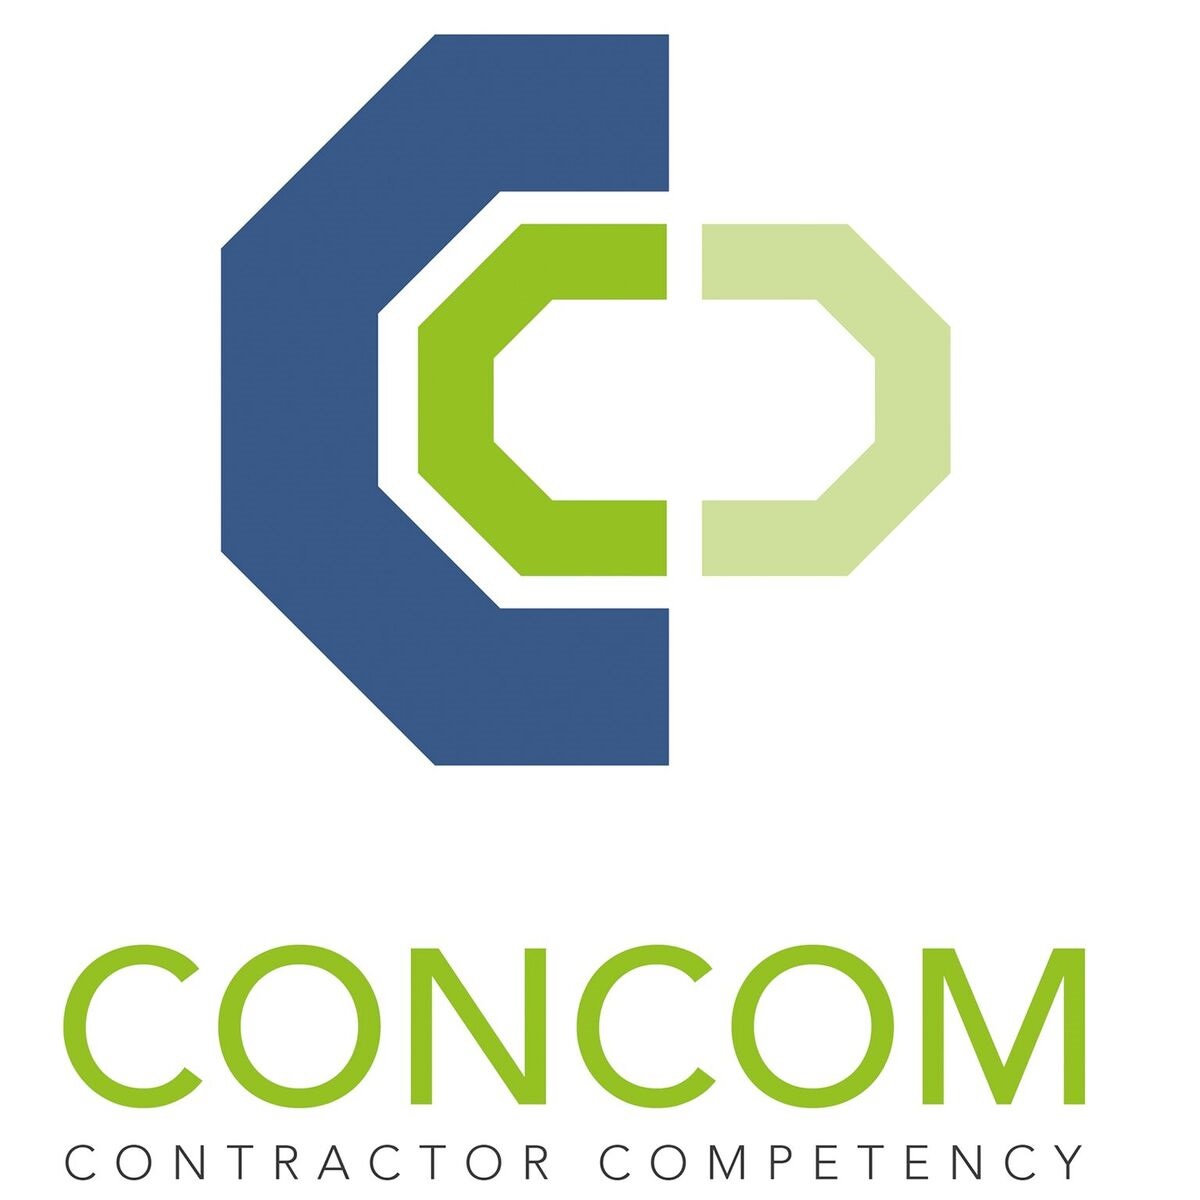 The Contractor Competency Forum